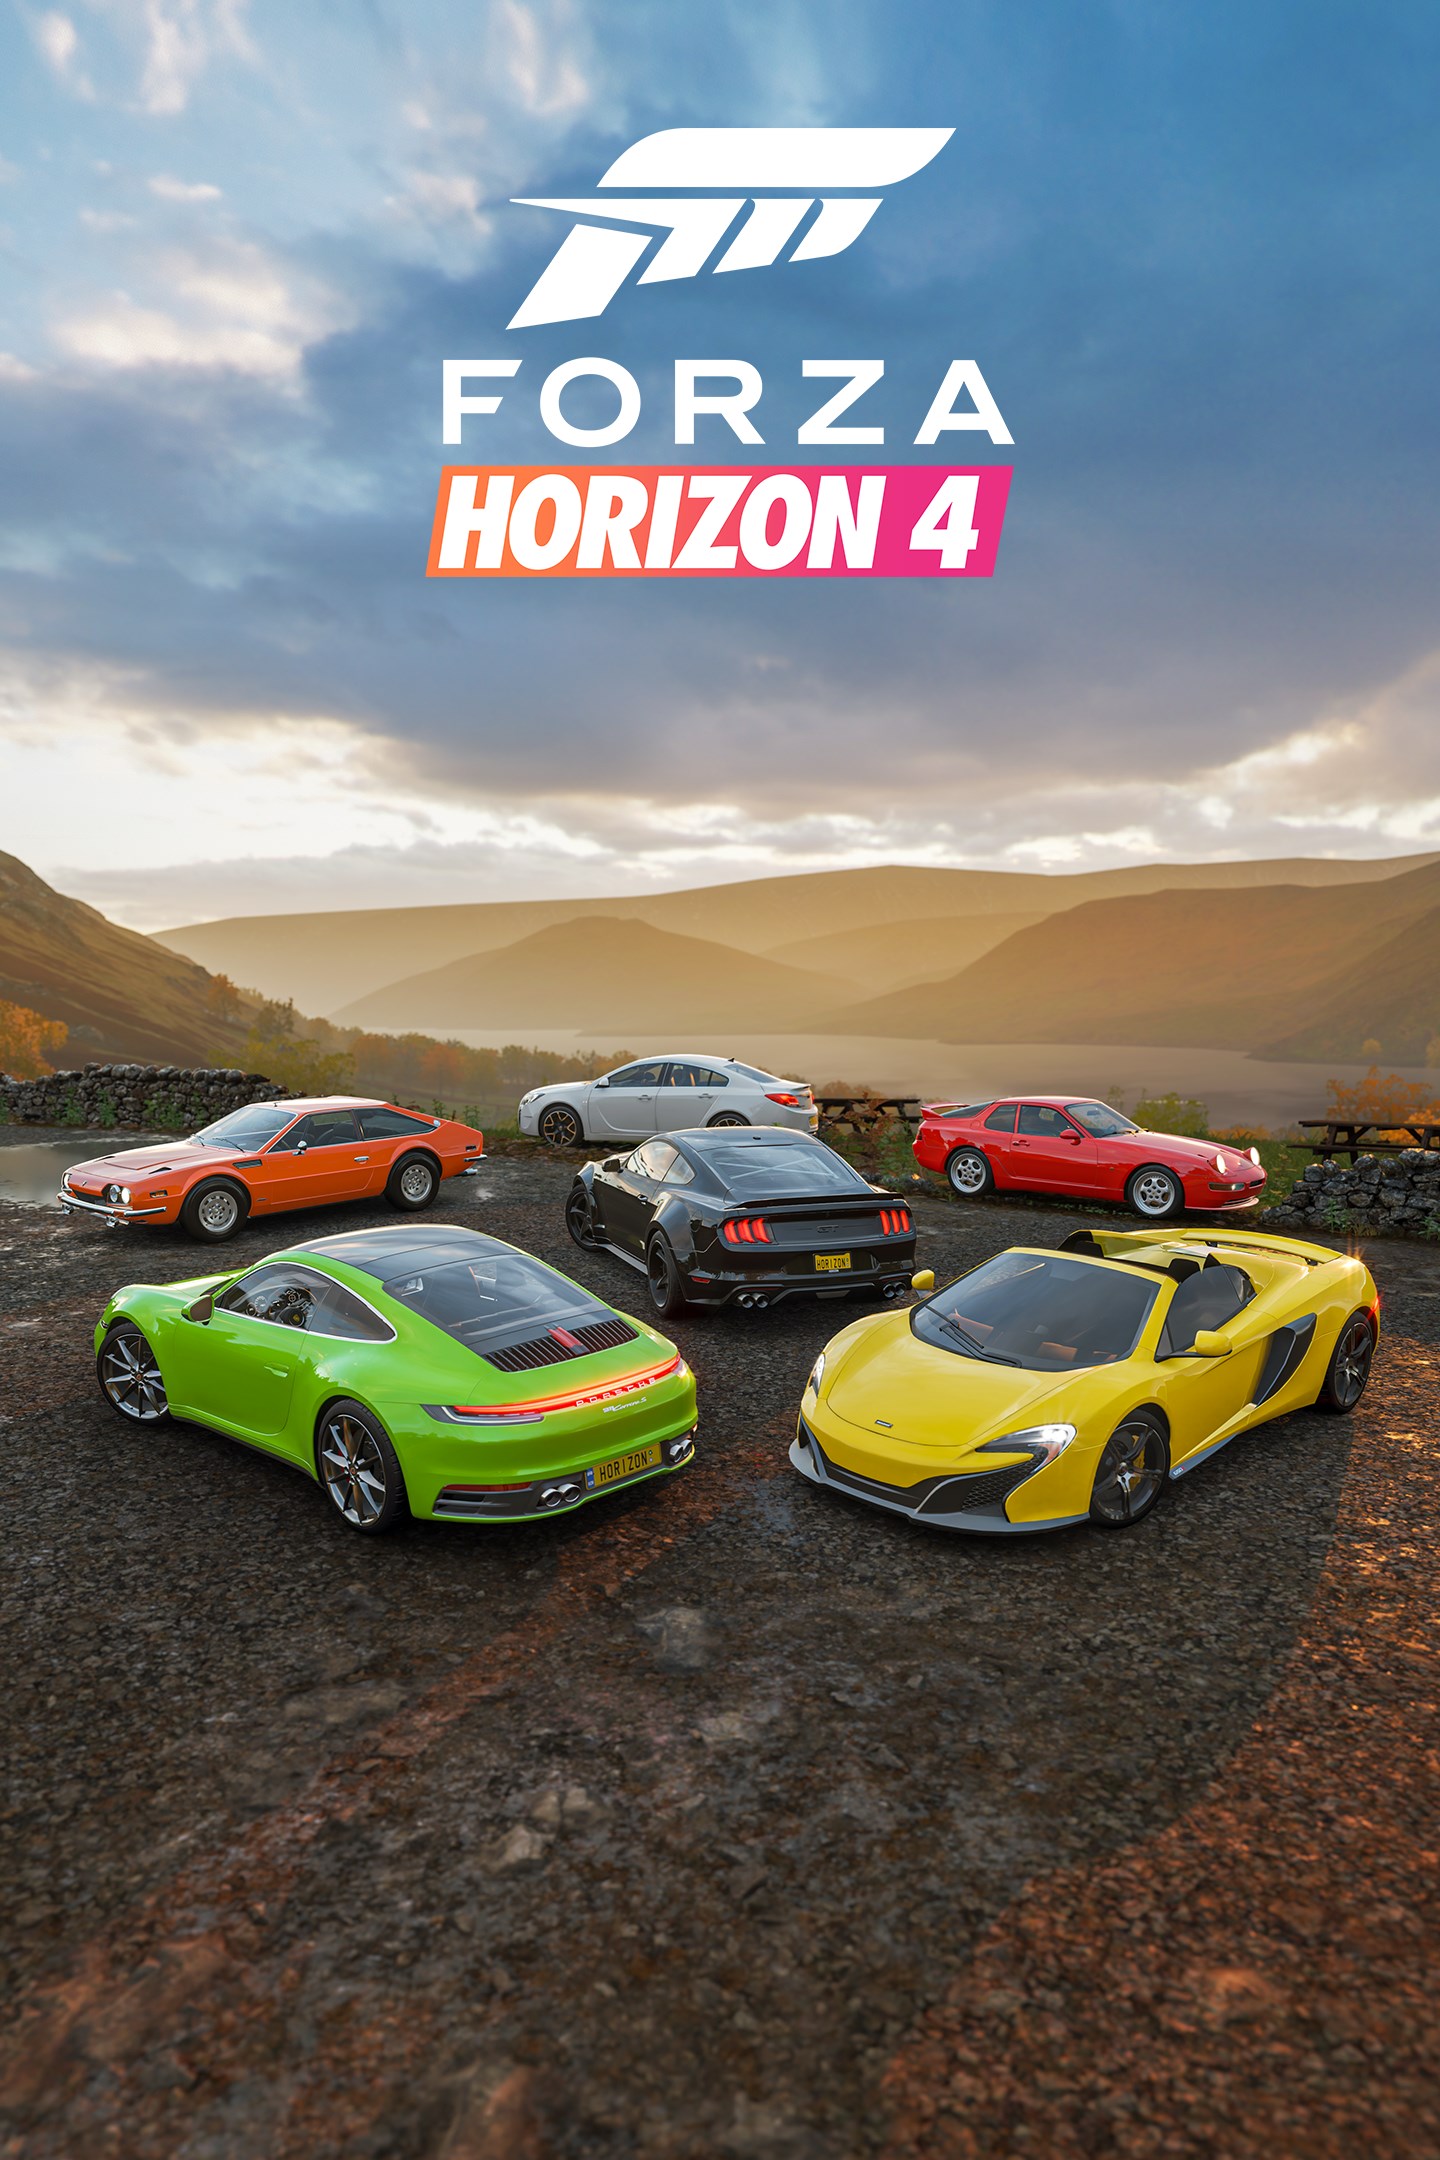 does vip come with forza horizon 4 ultimate edition